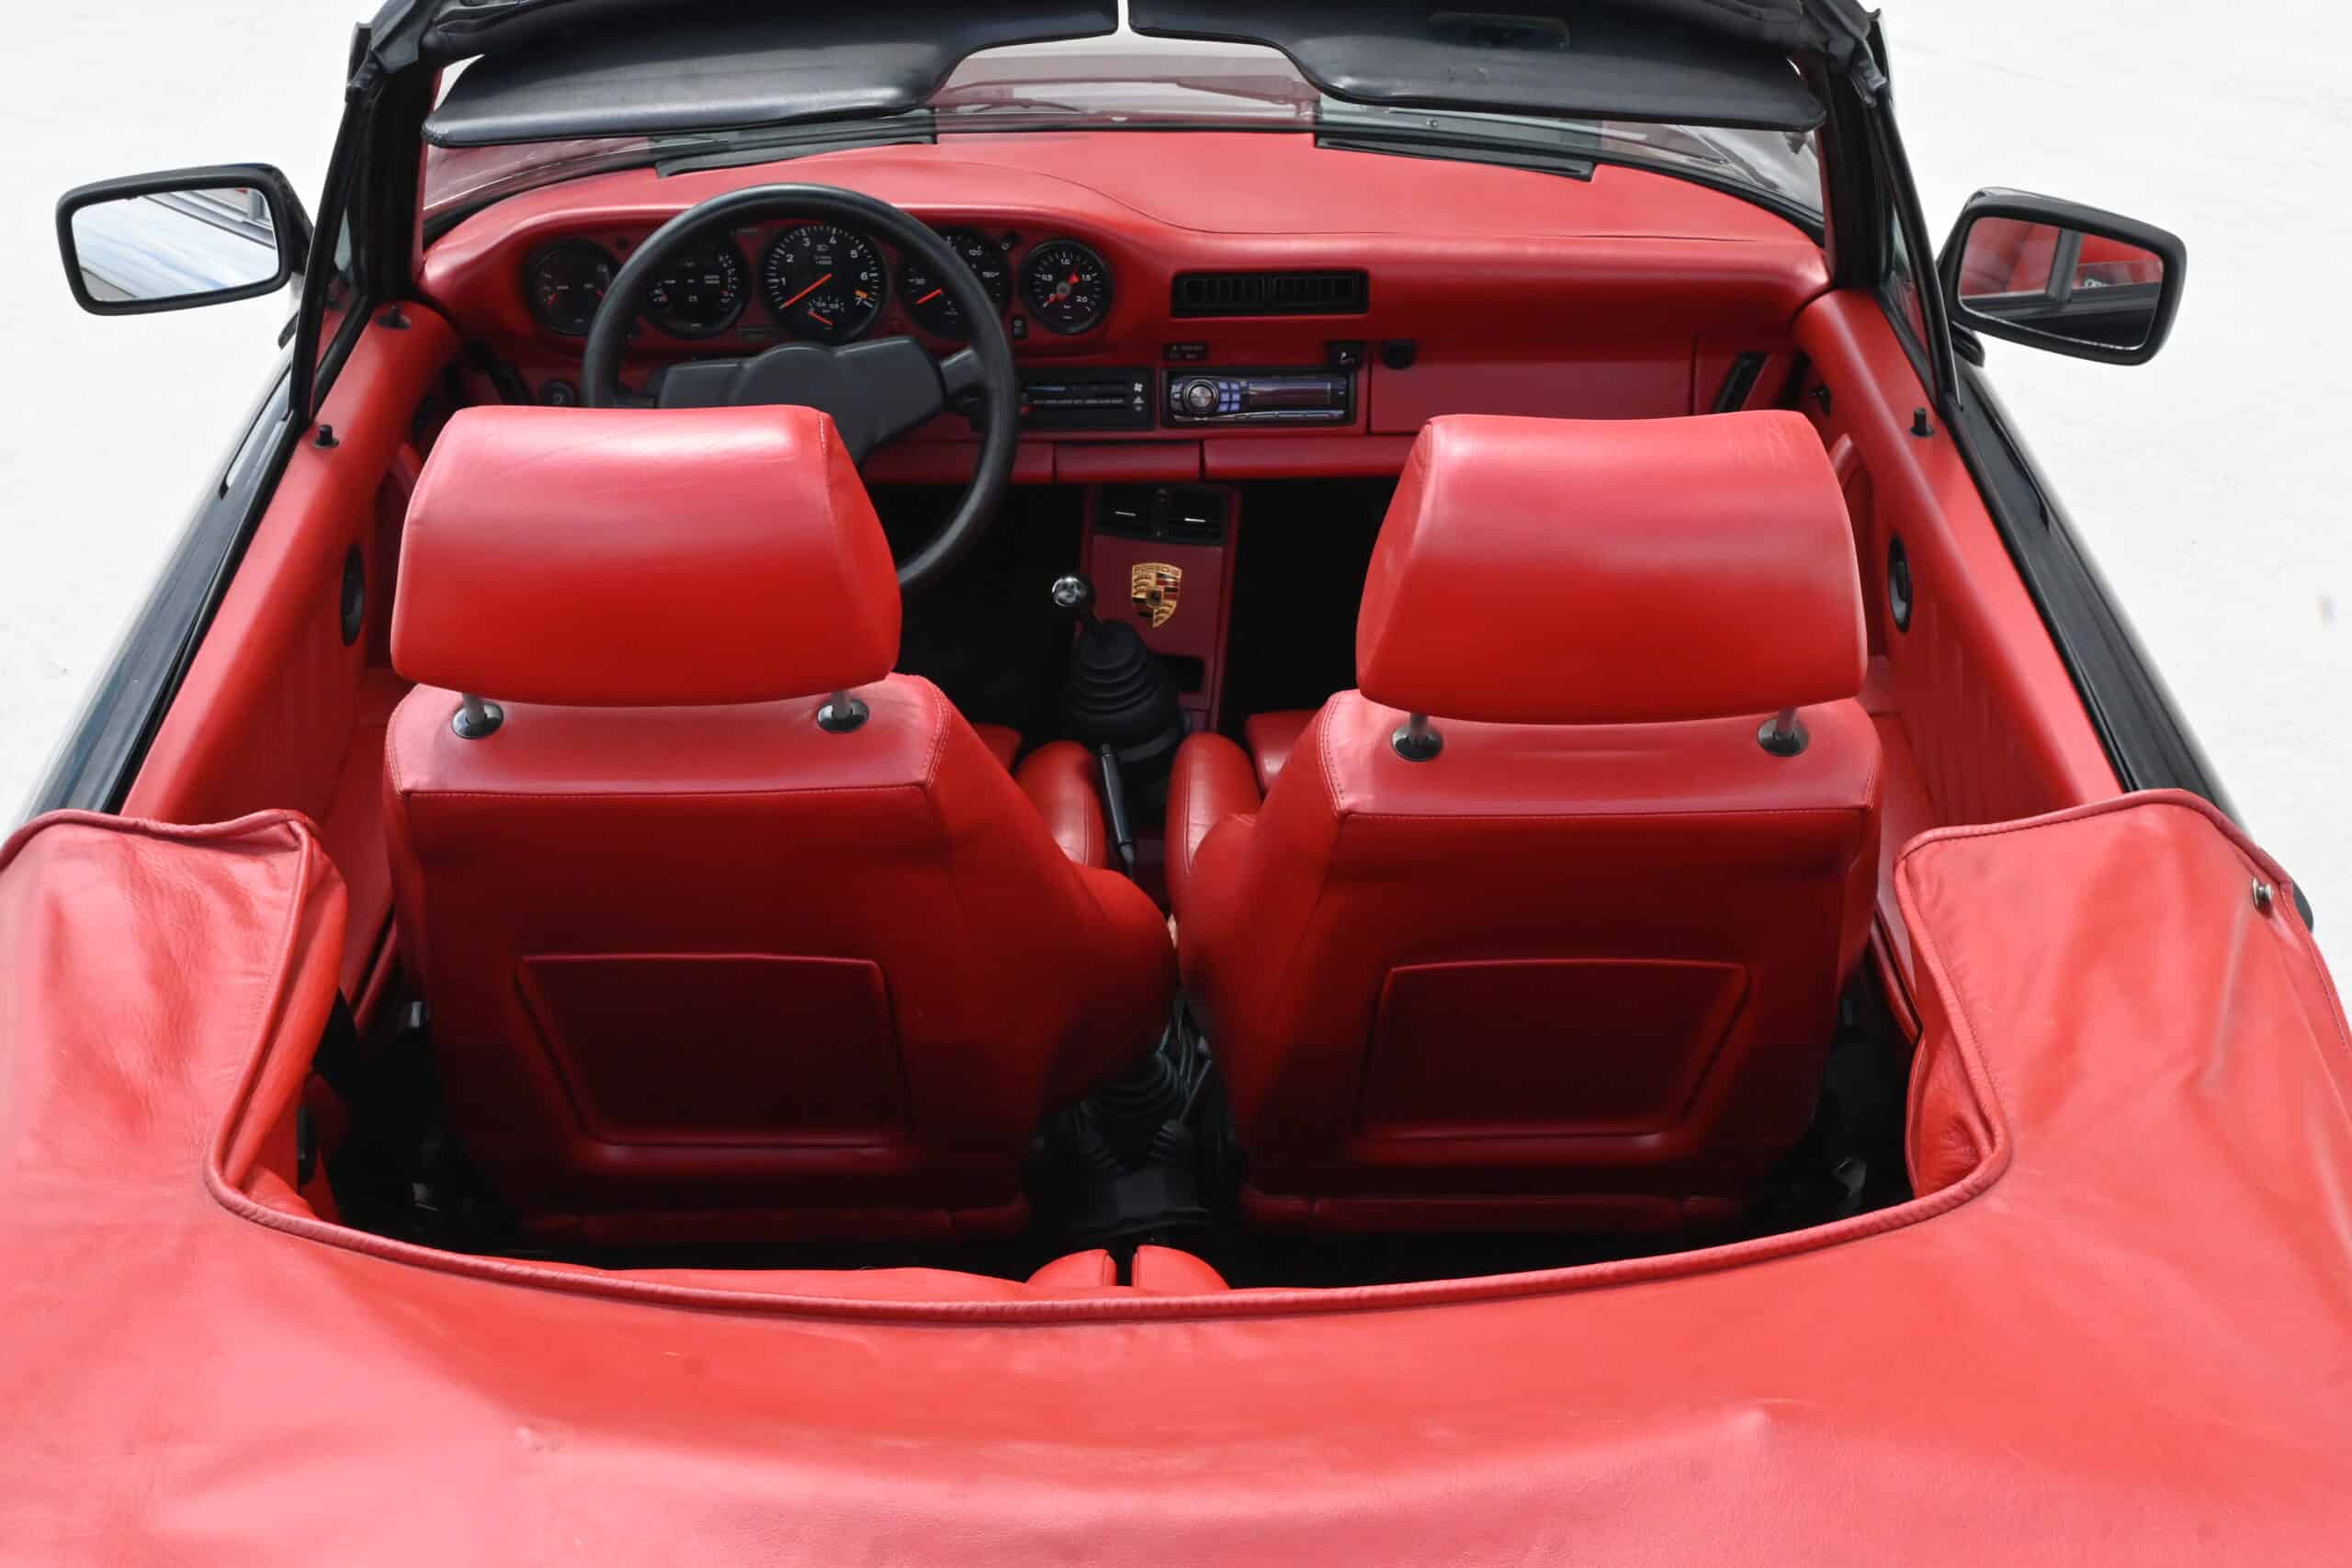 1981 Ruf 930 SCR Turbo / Alois Ruf Personal car / first 911 Turbo Cab / Ruf Certified / Comprehensive Press Coverage Clipping / Service records / 45K miles